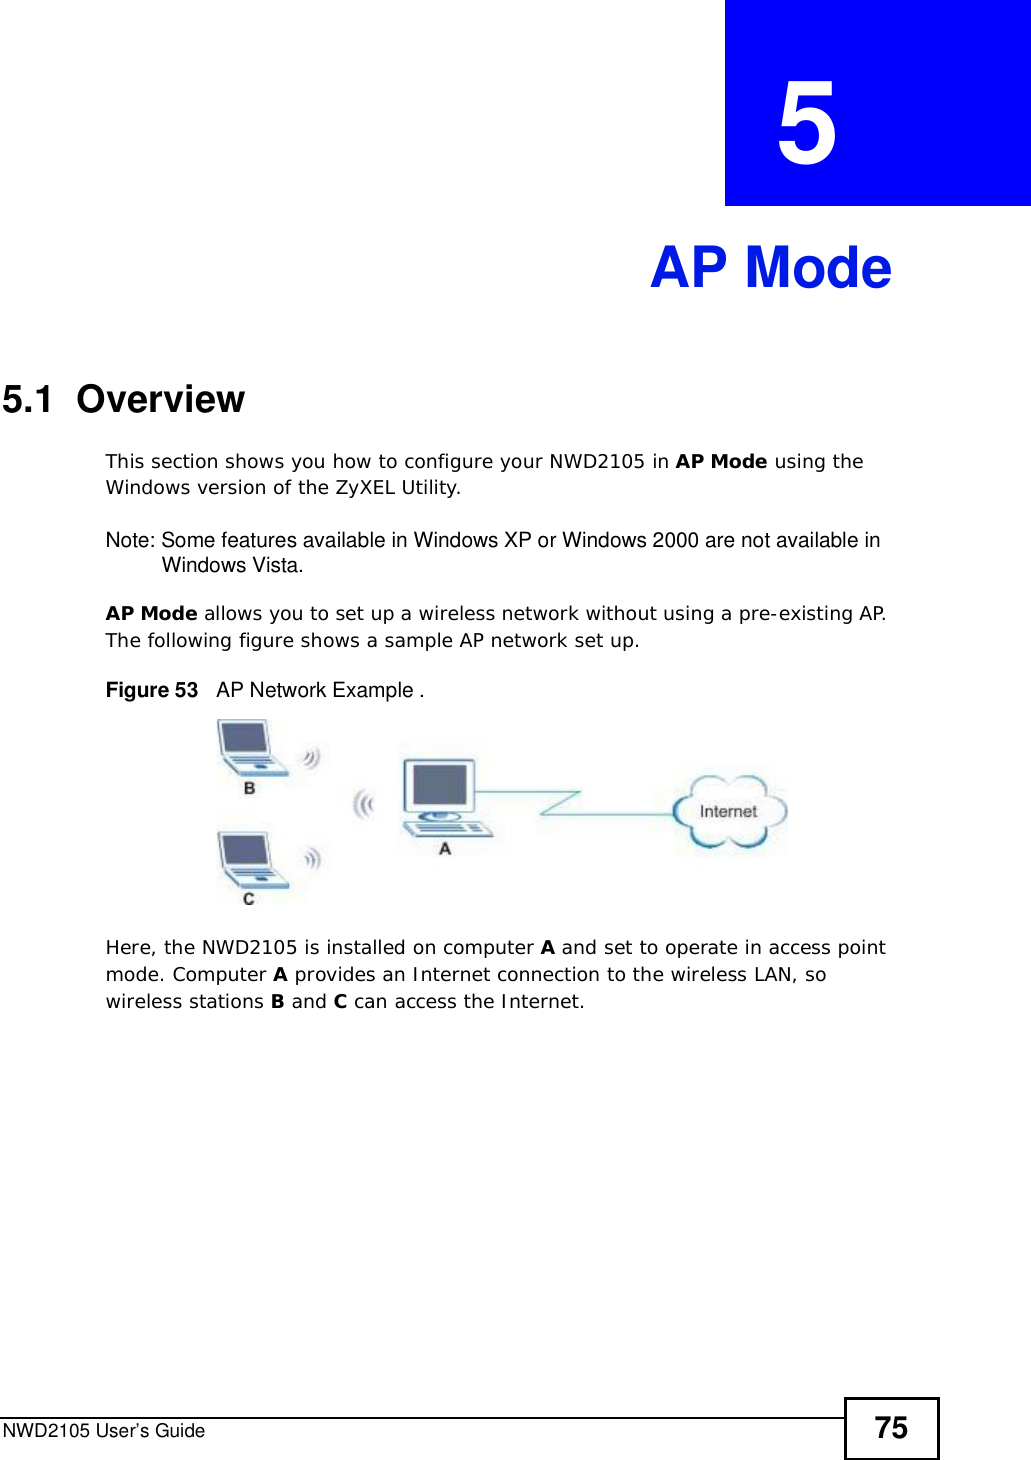 NWD2105 User’s Guide 75CHAPTER  5 AP Mode5.1  OverviewThis section shows you how to configure your NWD2105 in AP Mode using the Windows version of the ZyXEL Utility.Note: Some features available in Windows XP or Windows 2000 are not available in Windows Vista.AP Mode allows you to set up a wireless network without using a pre-existing AP. The following figure shows a sample AP network set up.Figure 53   AP Network Example .Here, the NWD2105 is installed on computer A and set to operate in access point mode. Computer A provides an Internet connection to the wireless LAN, so wireless stations B and C can access the Internet.